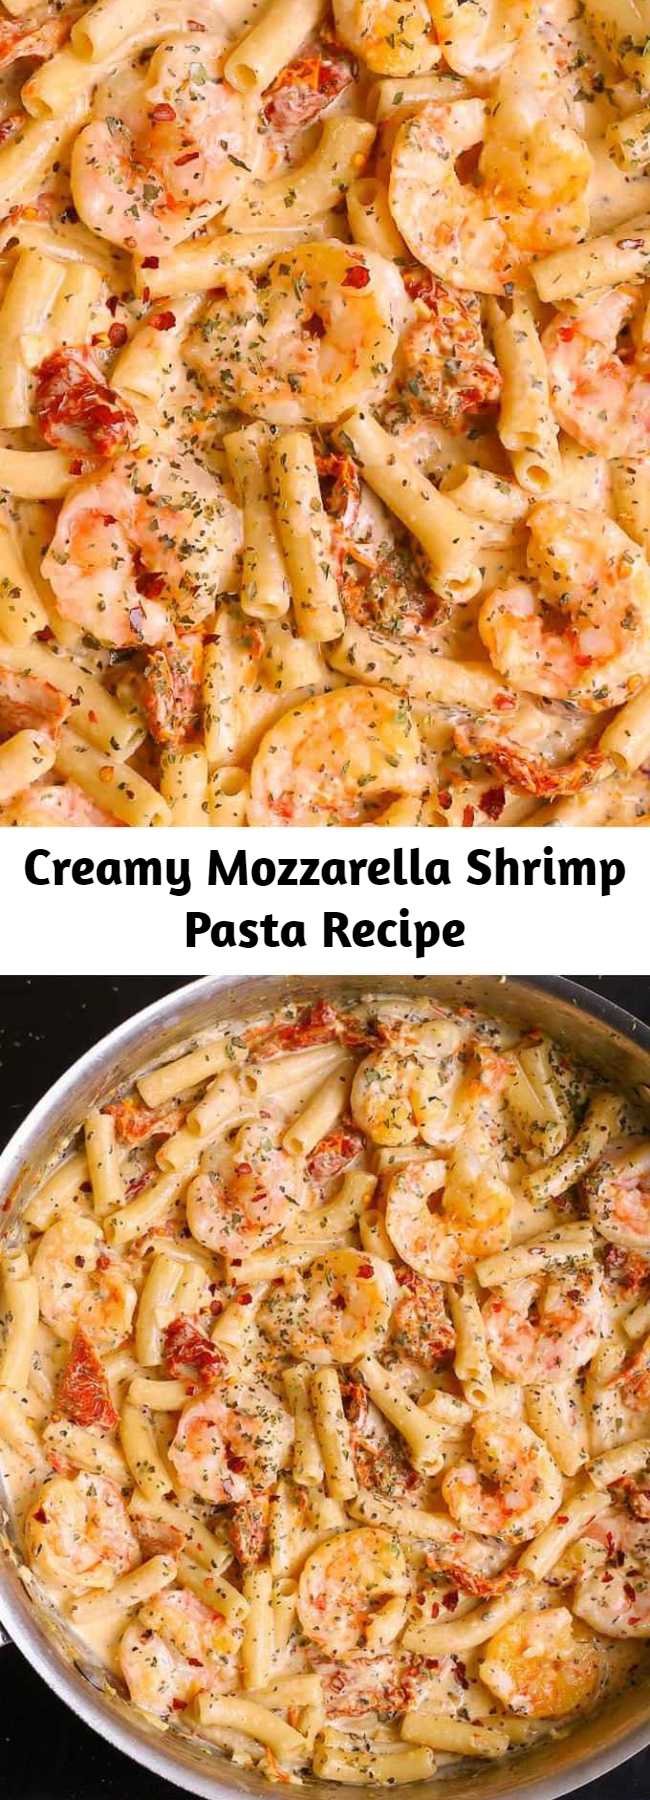 Creamy Mozzarella Shrimp Pasta Recipe - Delicious shrimp pasta with mozzarella cheese alfredo sauce is made from scratch with sun-dried tomatoes, basil, red pepper flakes, paprika, and cream.  You'll have a perfectly cooked shrimp: soft and tender and never dry or rubbery!